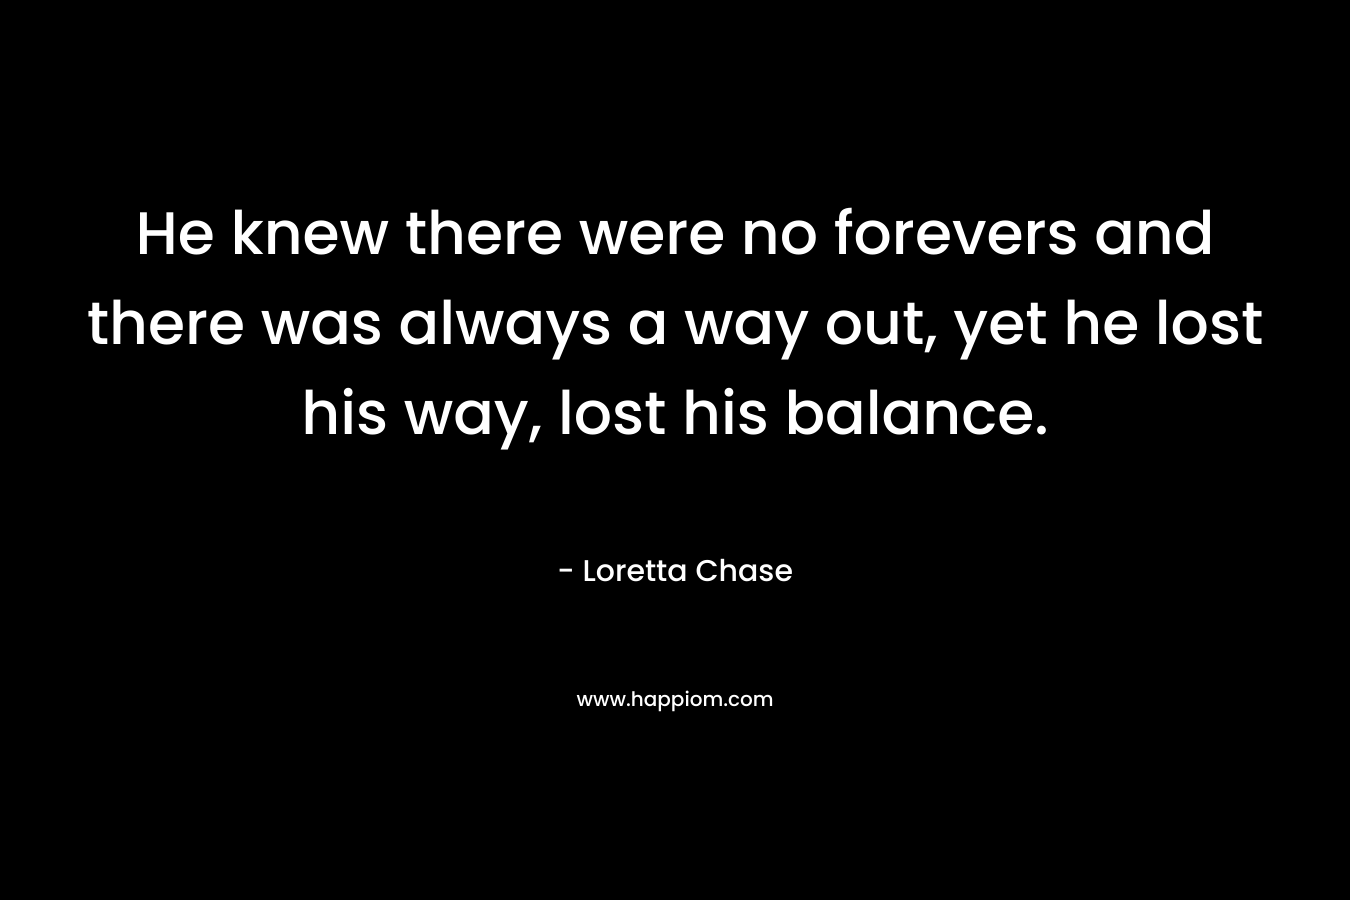 He knew there were no forevers and there was always a way out, yet he lost his way, lost his balance. – Loretta Chase